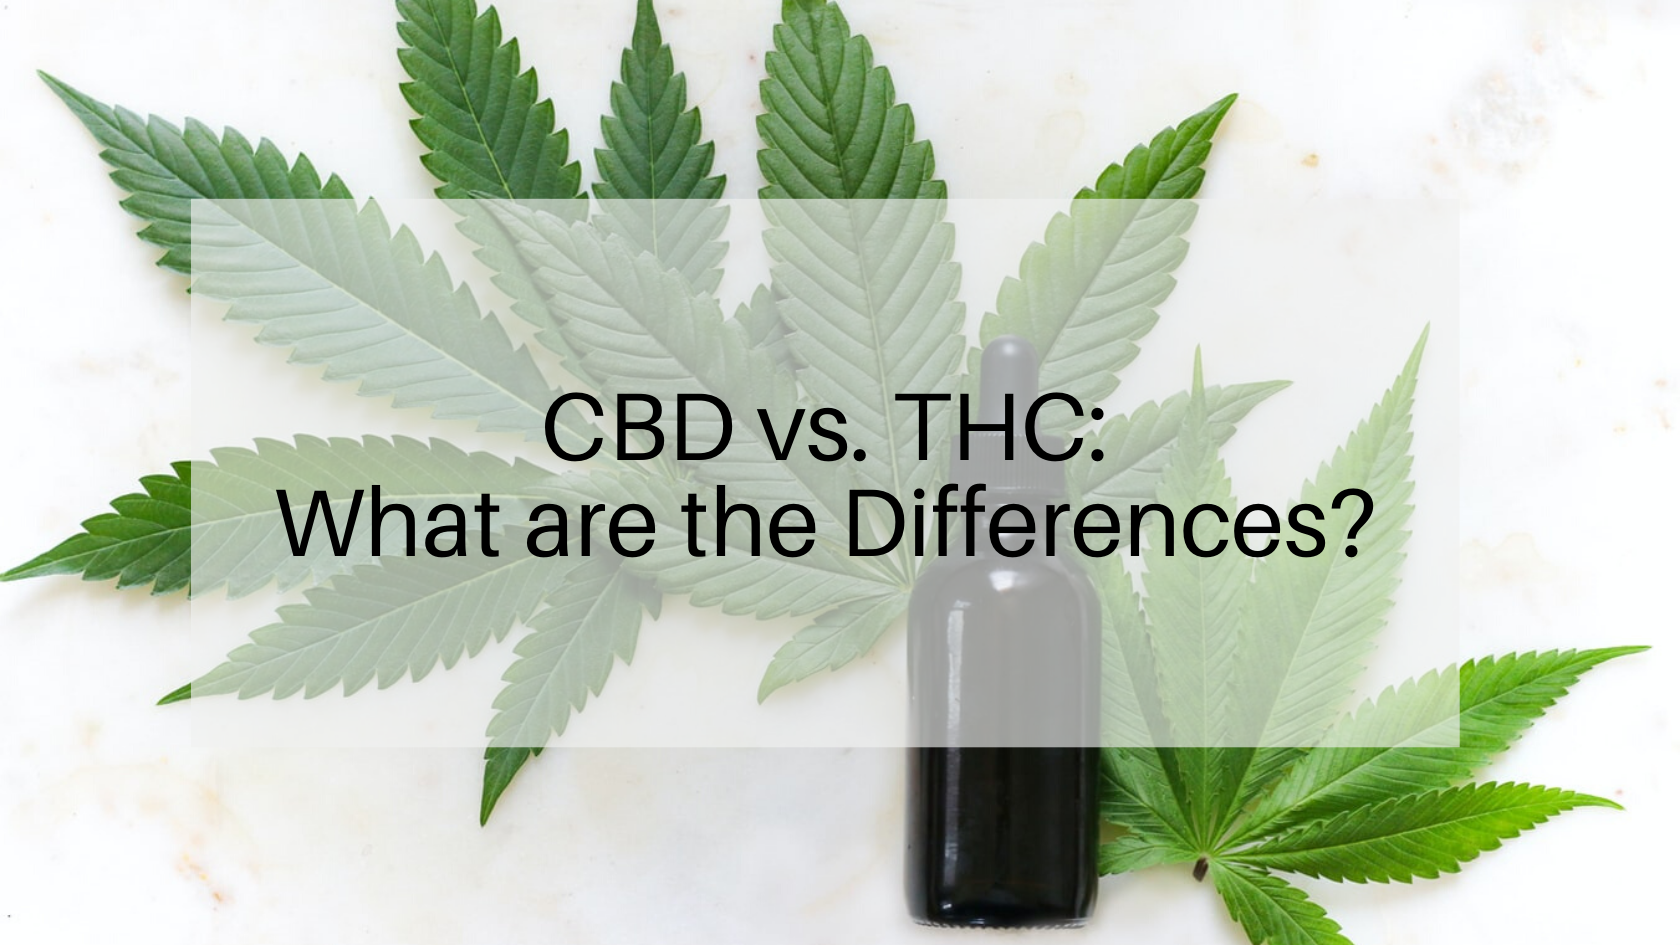 CBD vs. THC: What are the Differences?